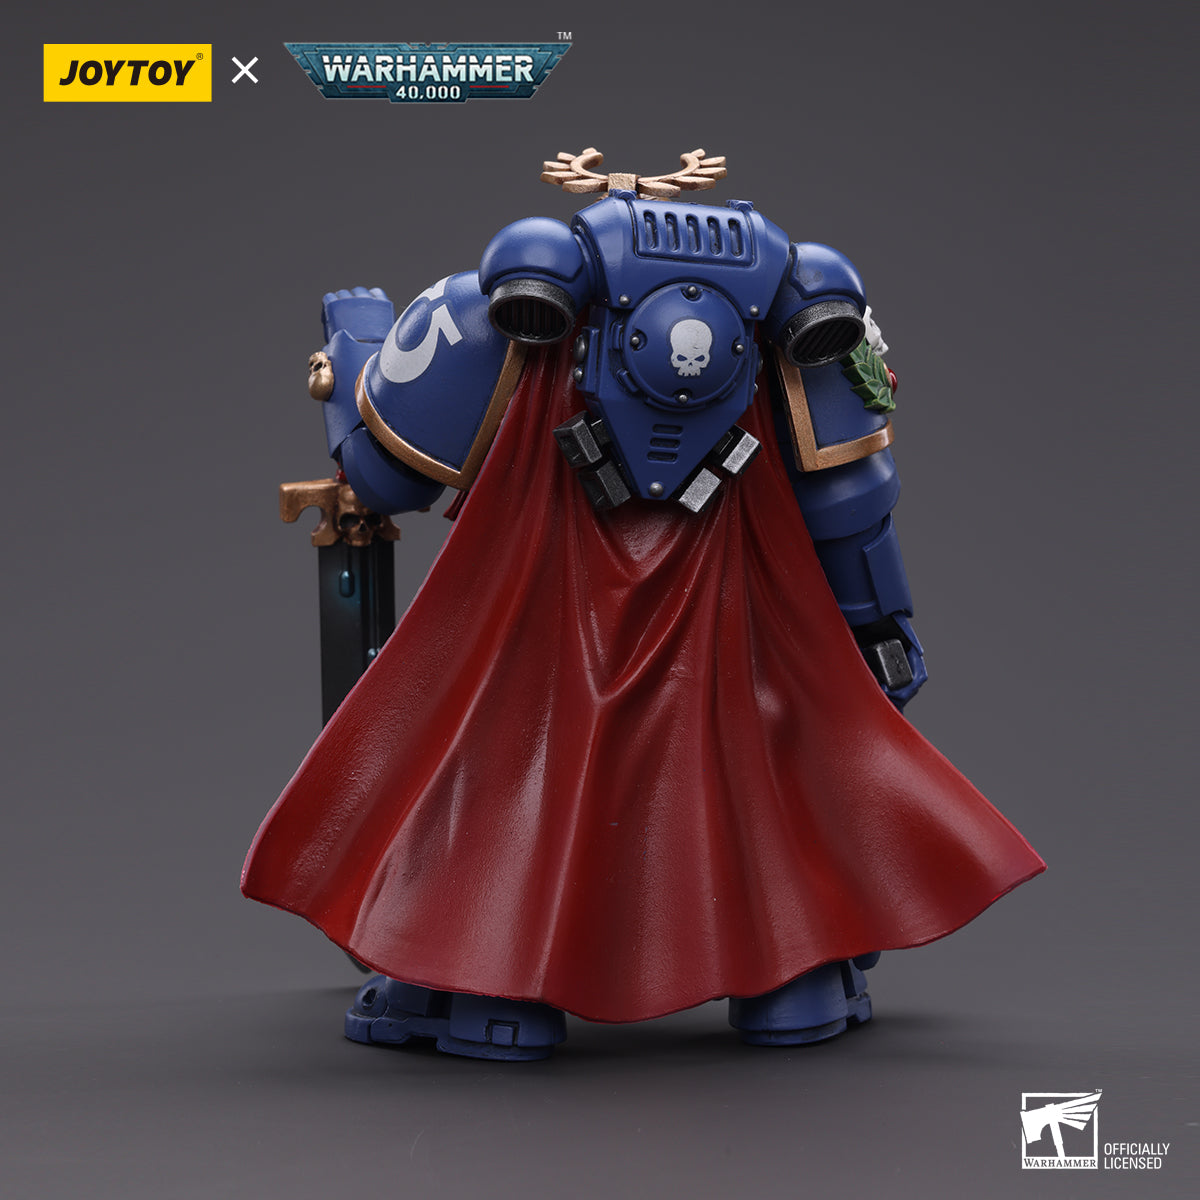 Warhammer Collectibles 1/18 Scale Ultramarines Primaris Captain with Power Sword and Plasma Pistol